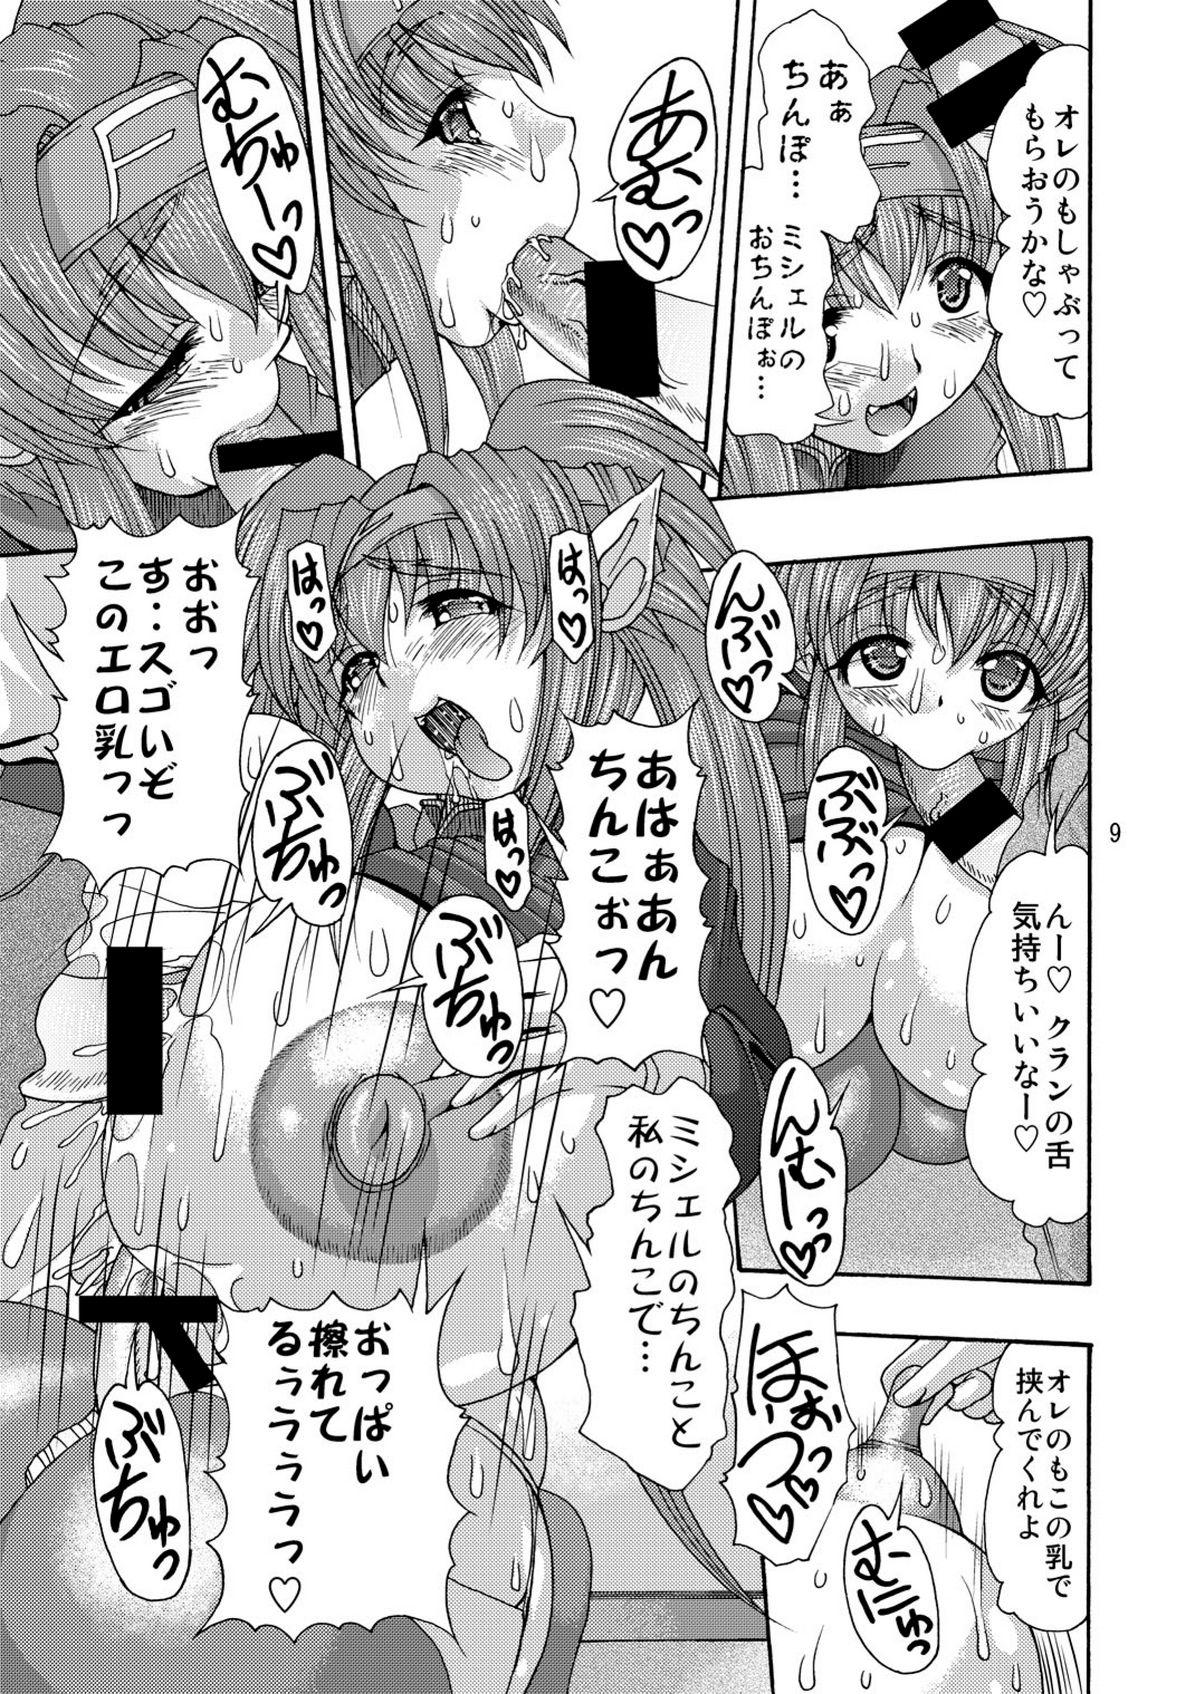 Casting Muchipuni Paradise! - Macross frontier Extreme - Page 9